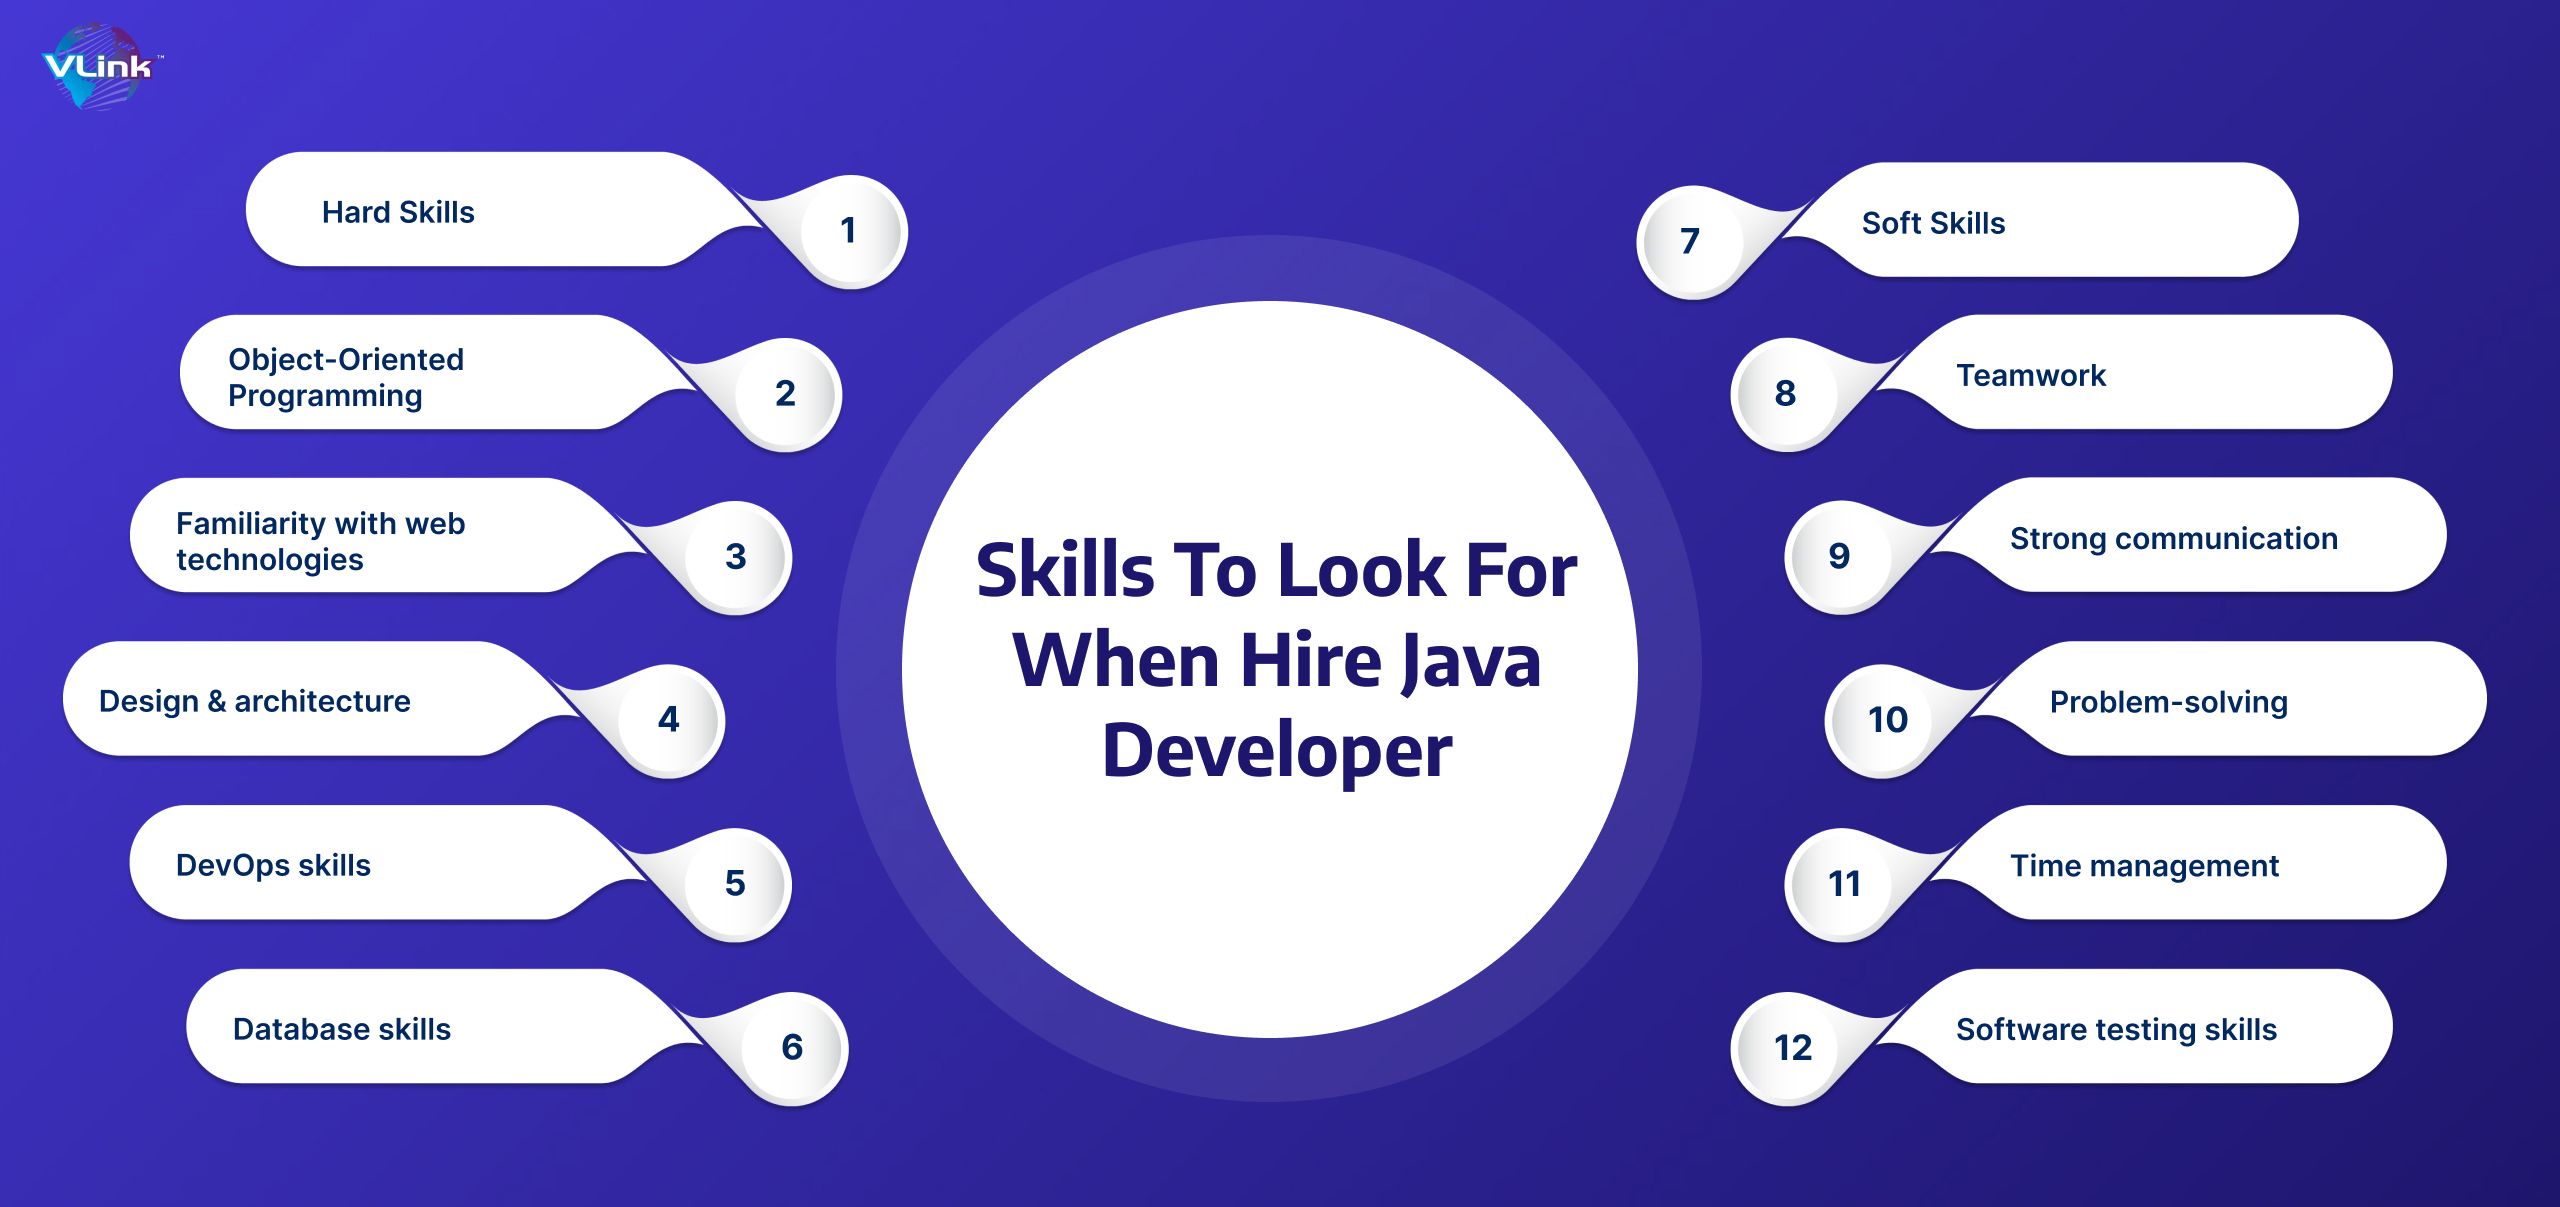 What Should You Look for When Hiring an Offshore Java Developer